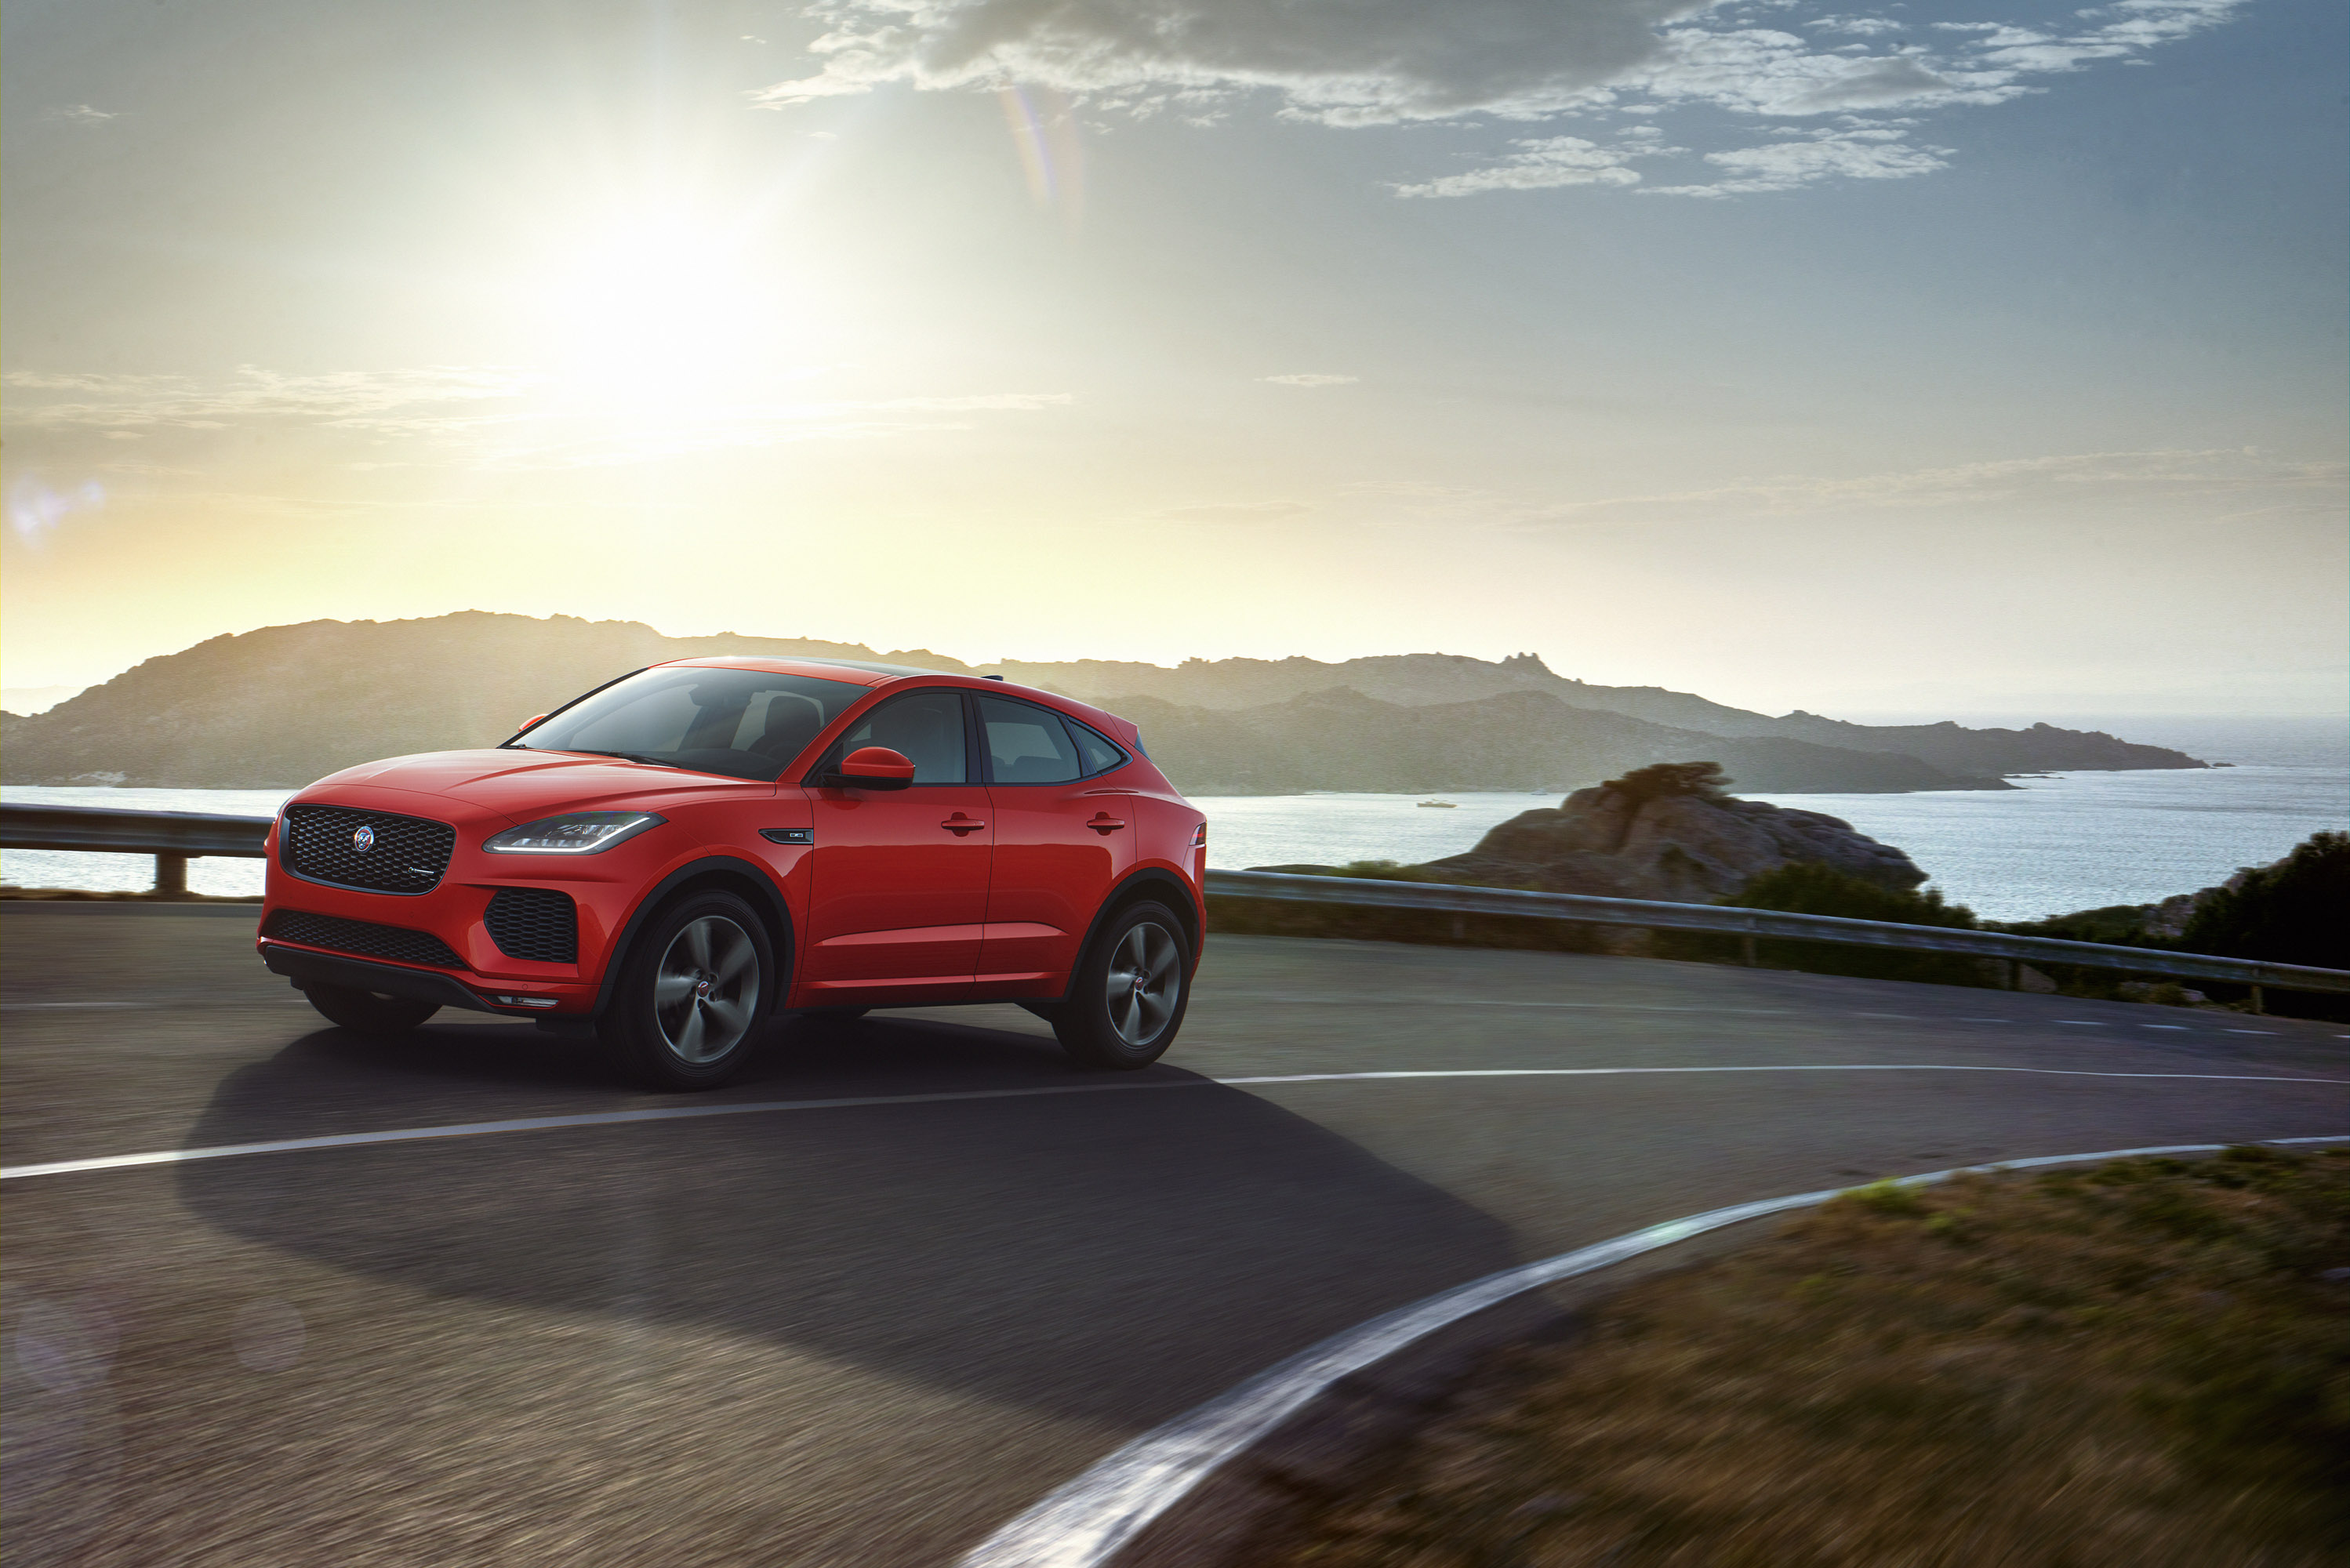 Jaguar F-PACE Checkered Limited Edition